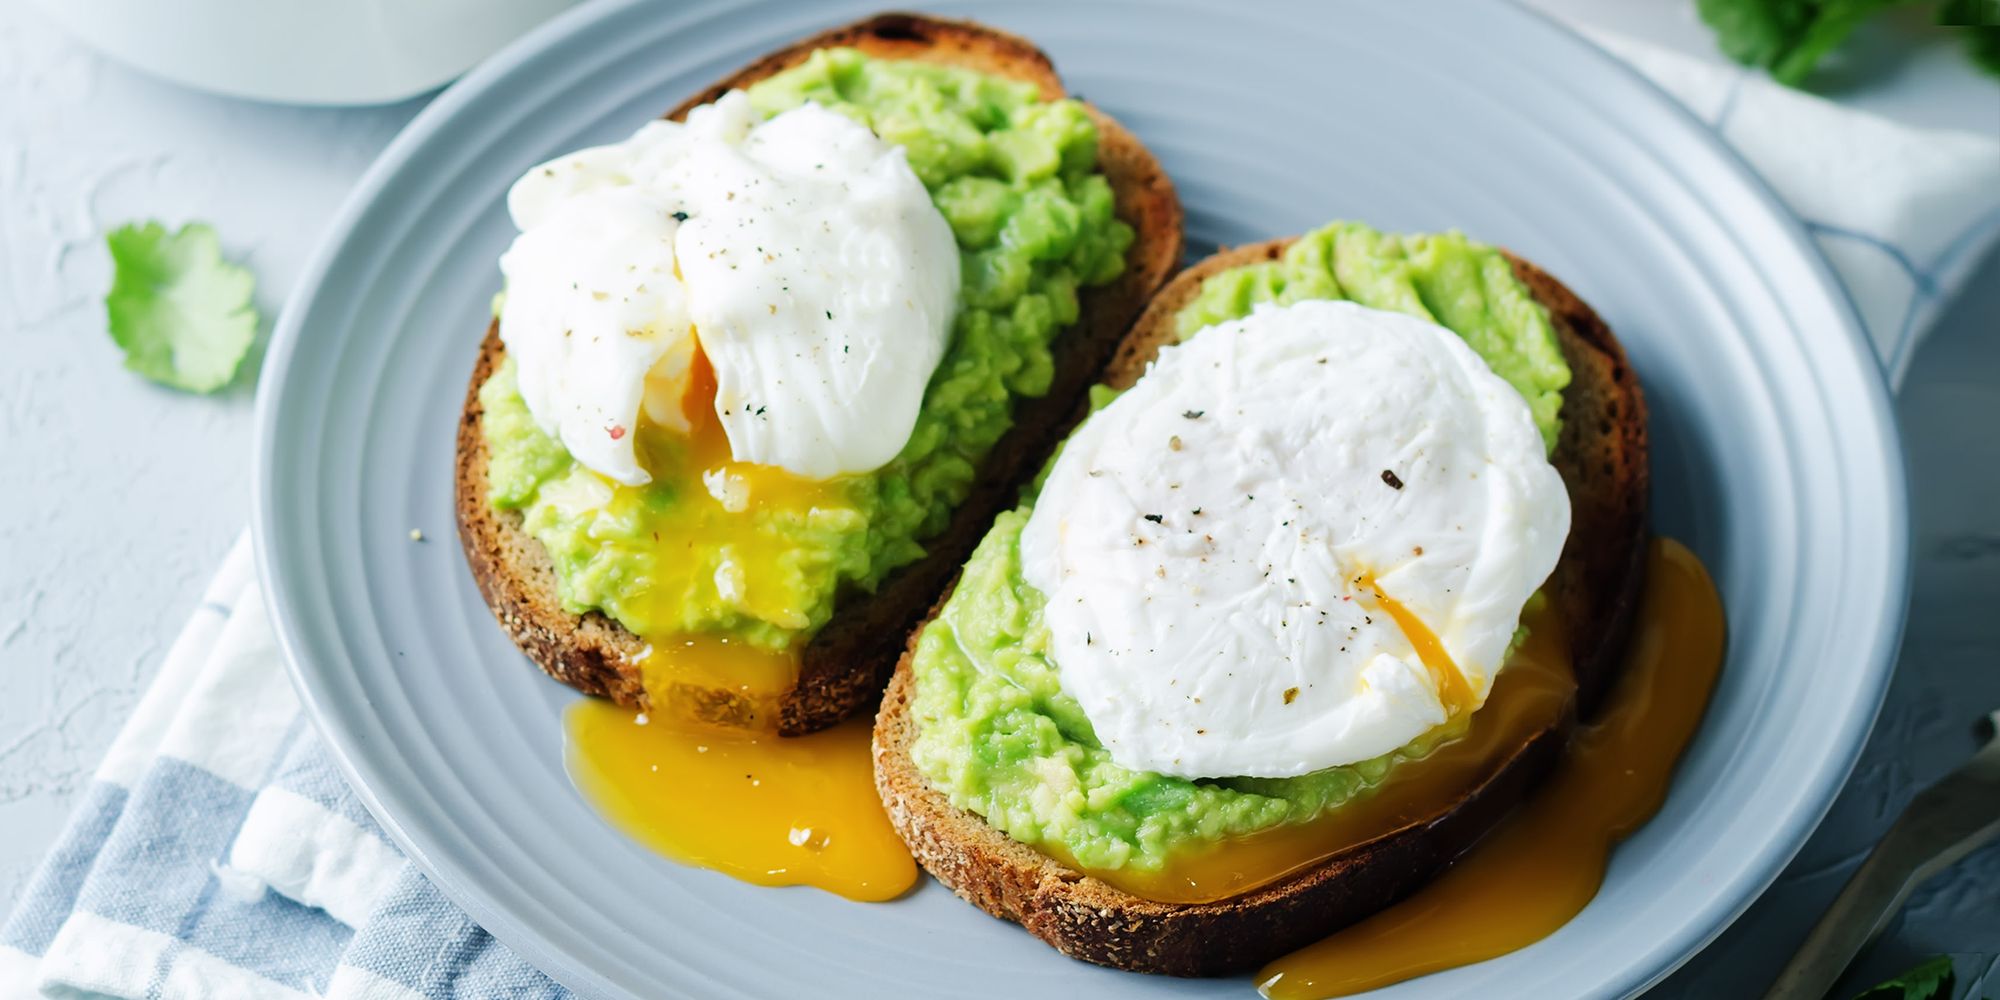 How many Kcal are in 2 poached eggs?